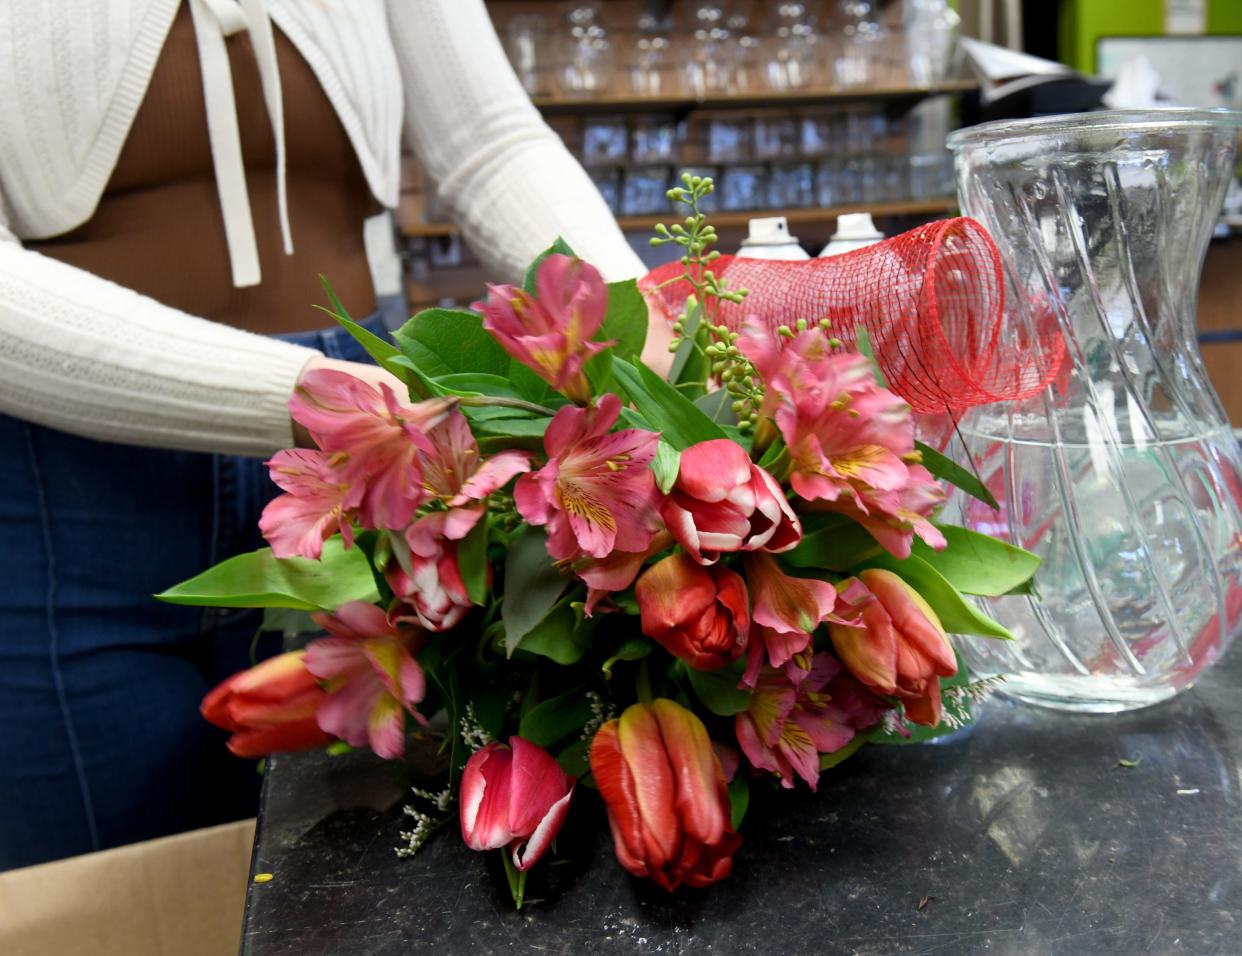 Aleah McKenney-Hartley, co-owner of Botanica Florist in Jackson Township, creates an arrangement from fresh flowers.